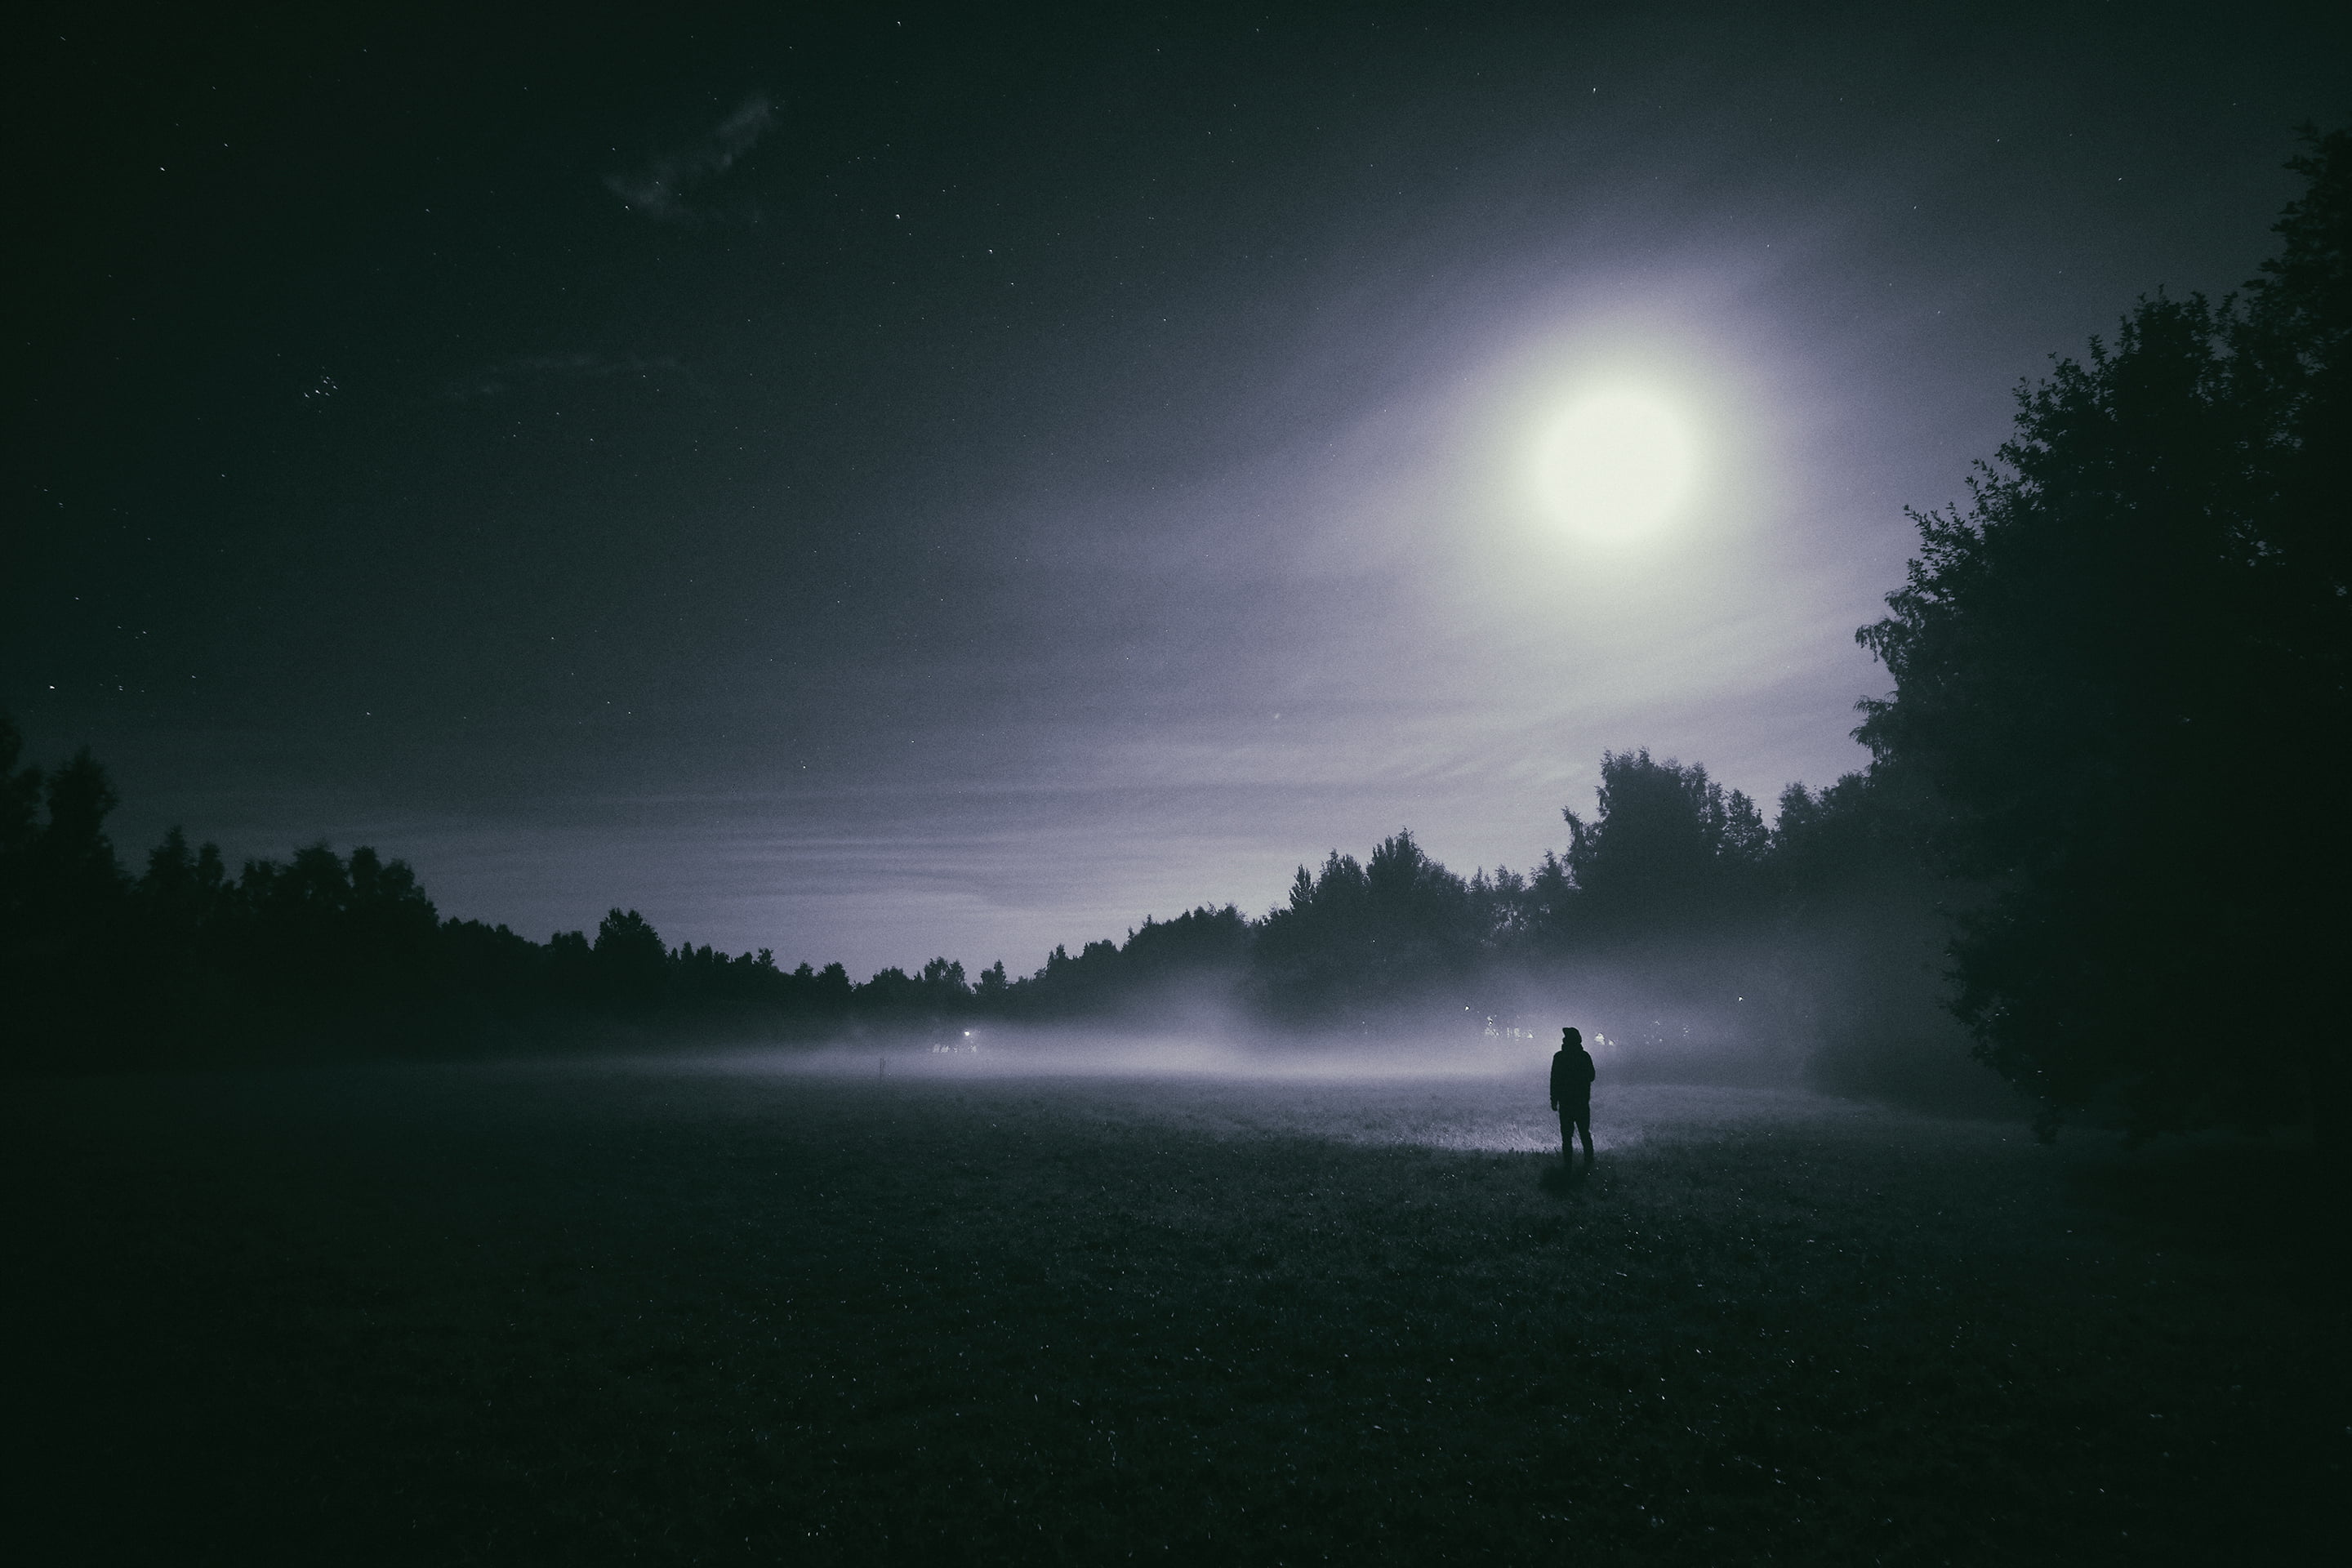 person standing beside tree under moon photograph